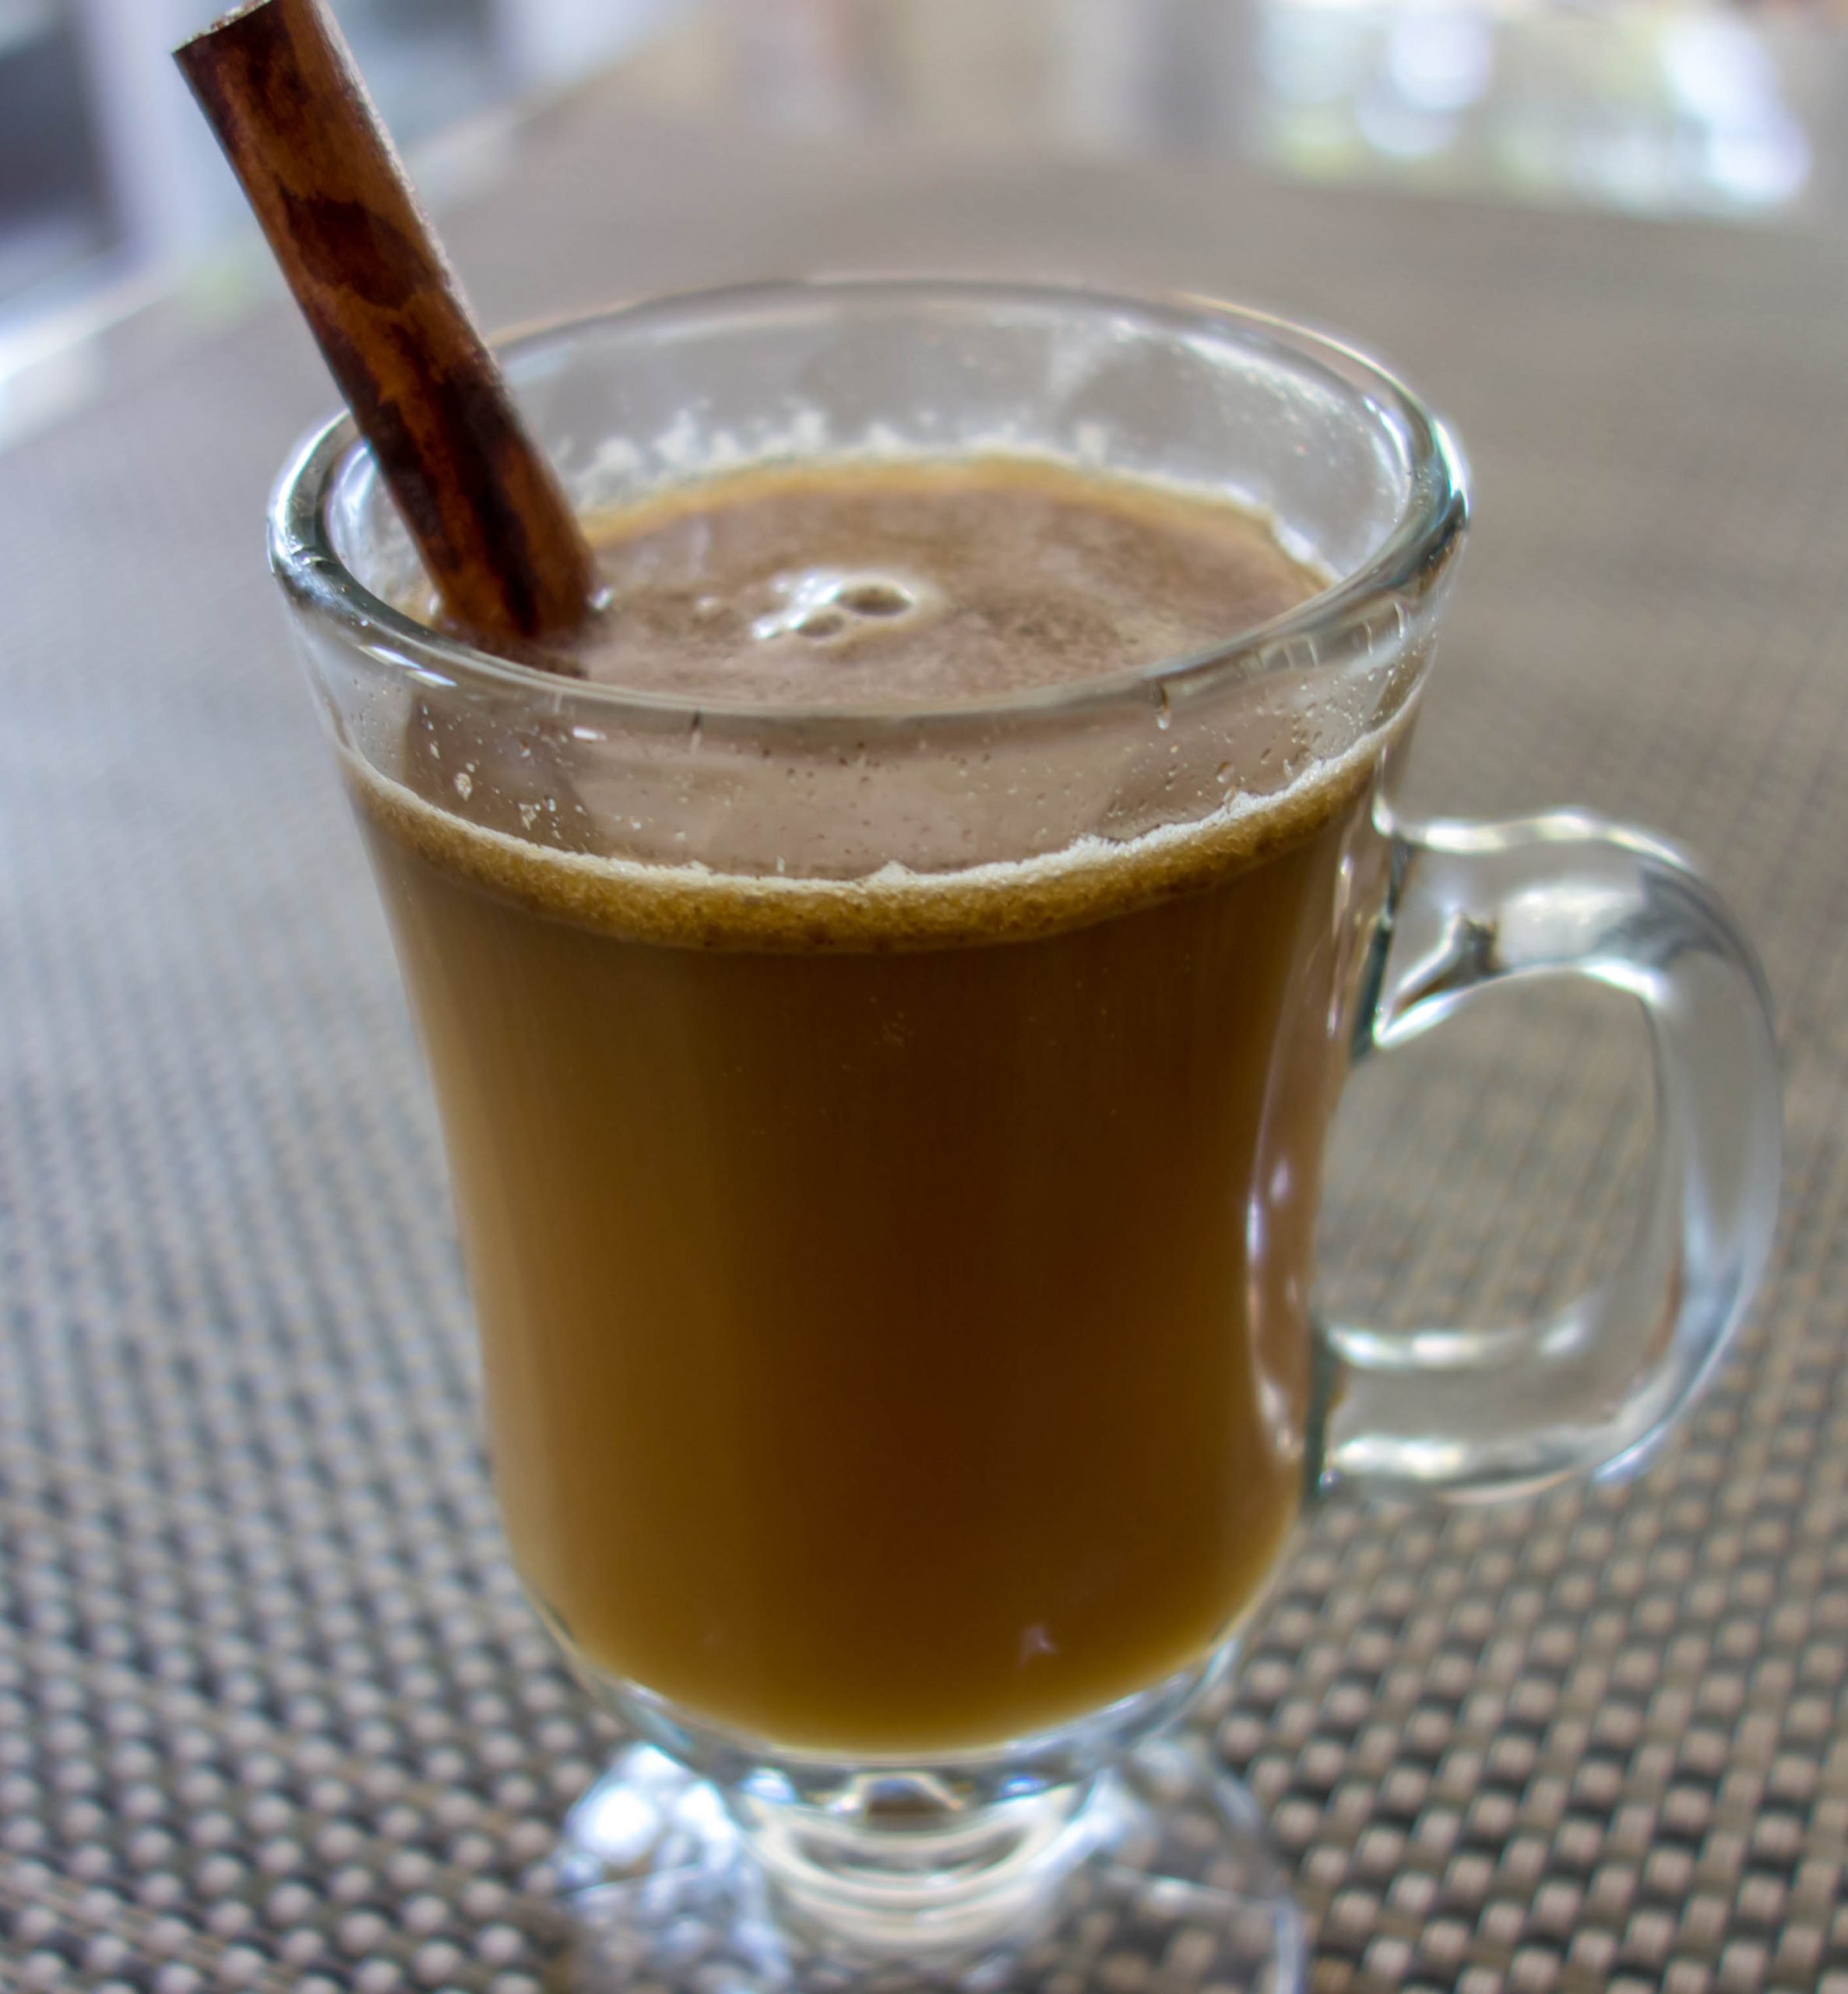 How to Make Hot Buttered Rum (Video)